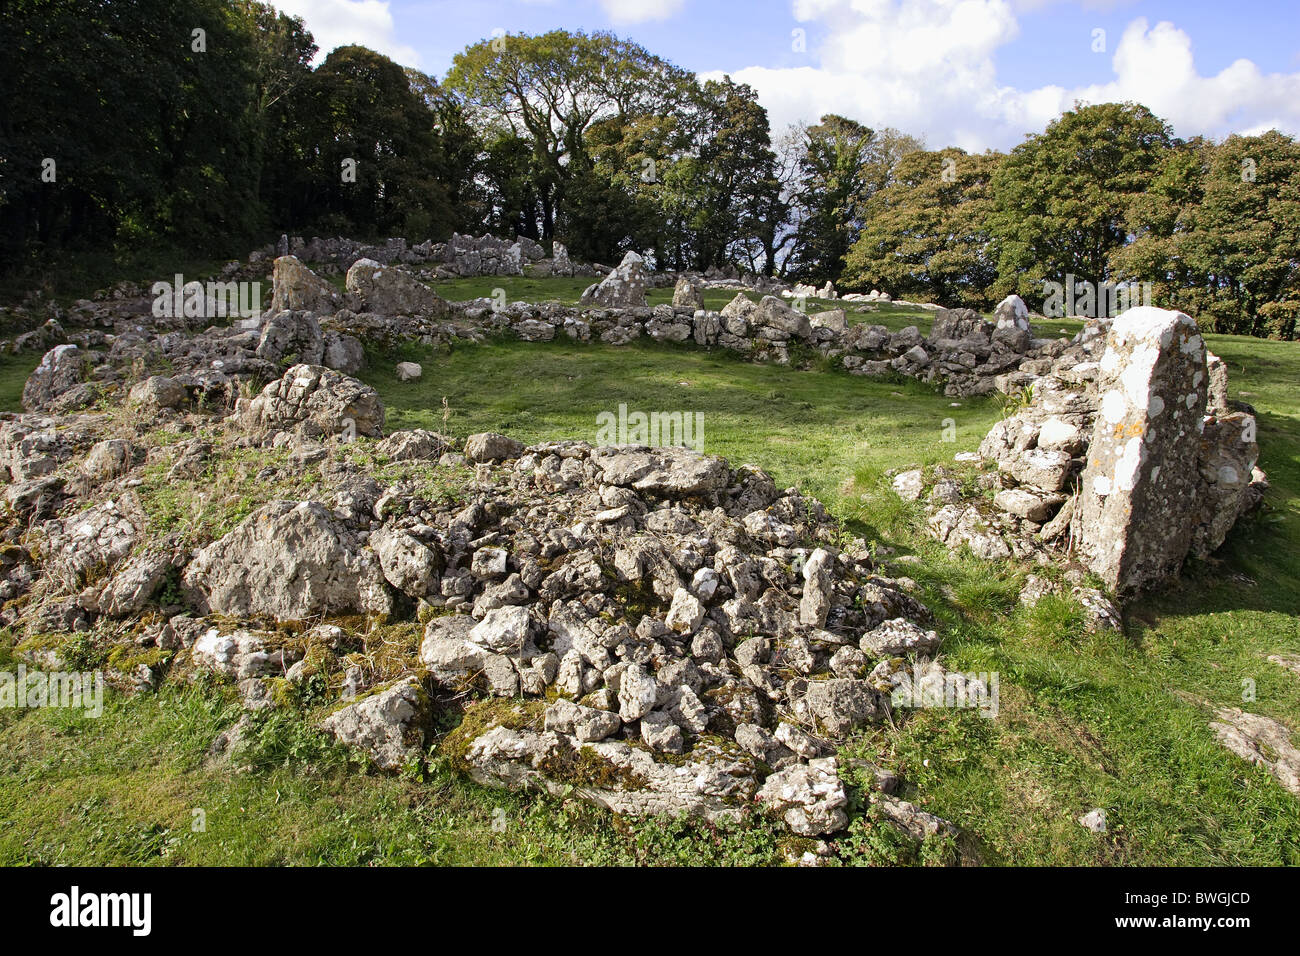 Remains of an Anglo-Roman village at Din Lligwy, Isle of Anglesey, North Wales Stock Photo